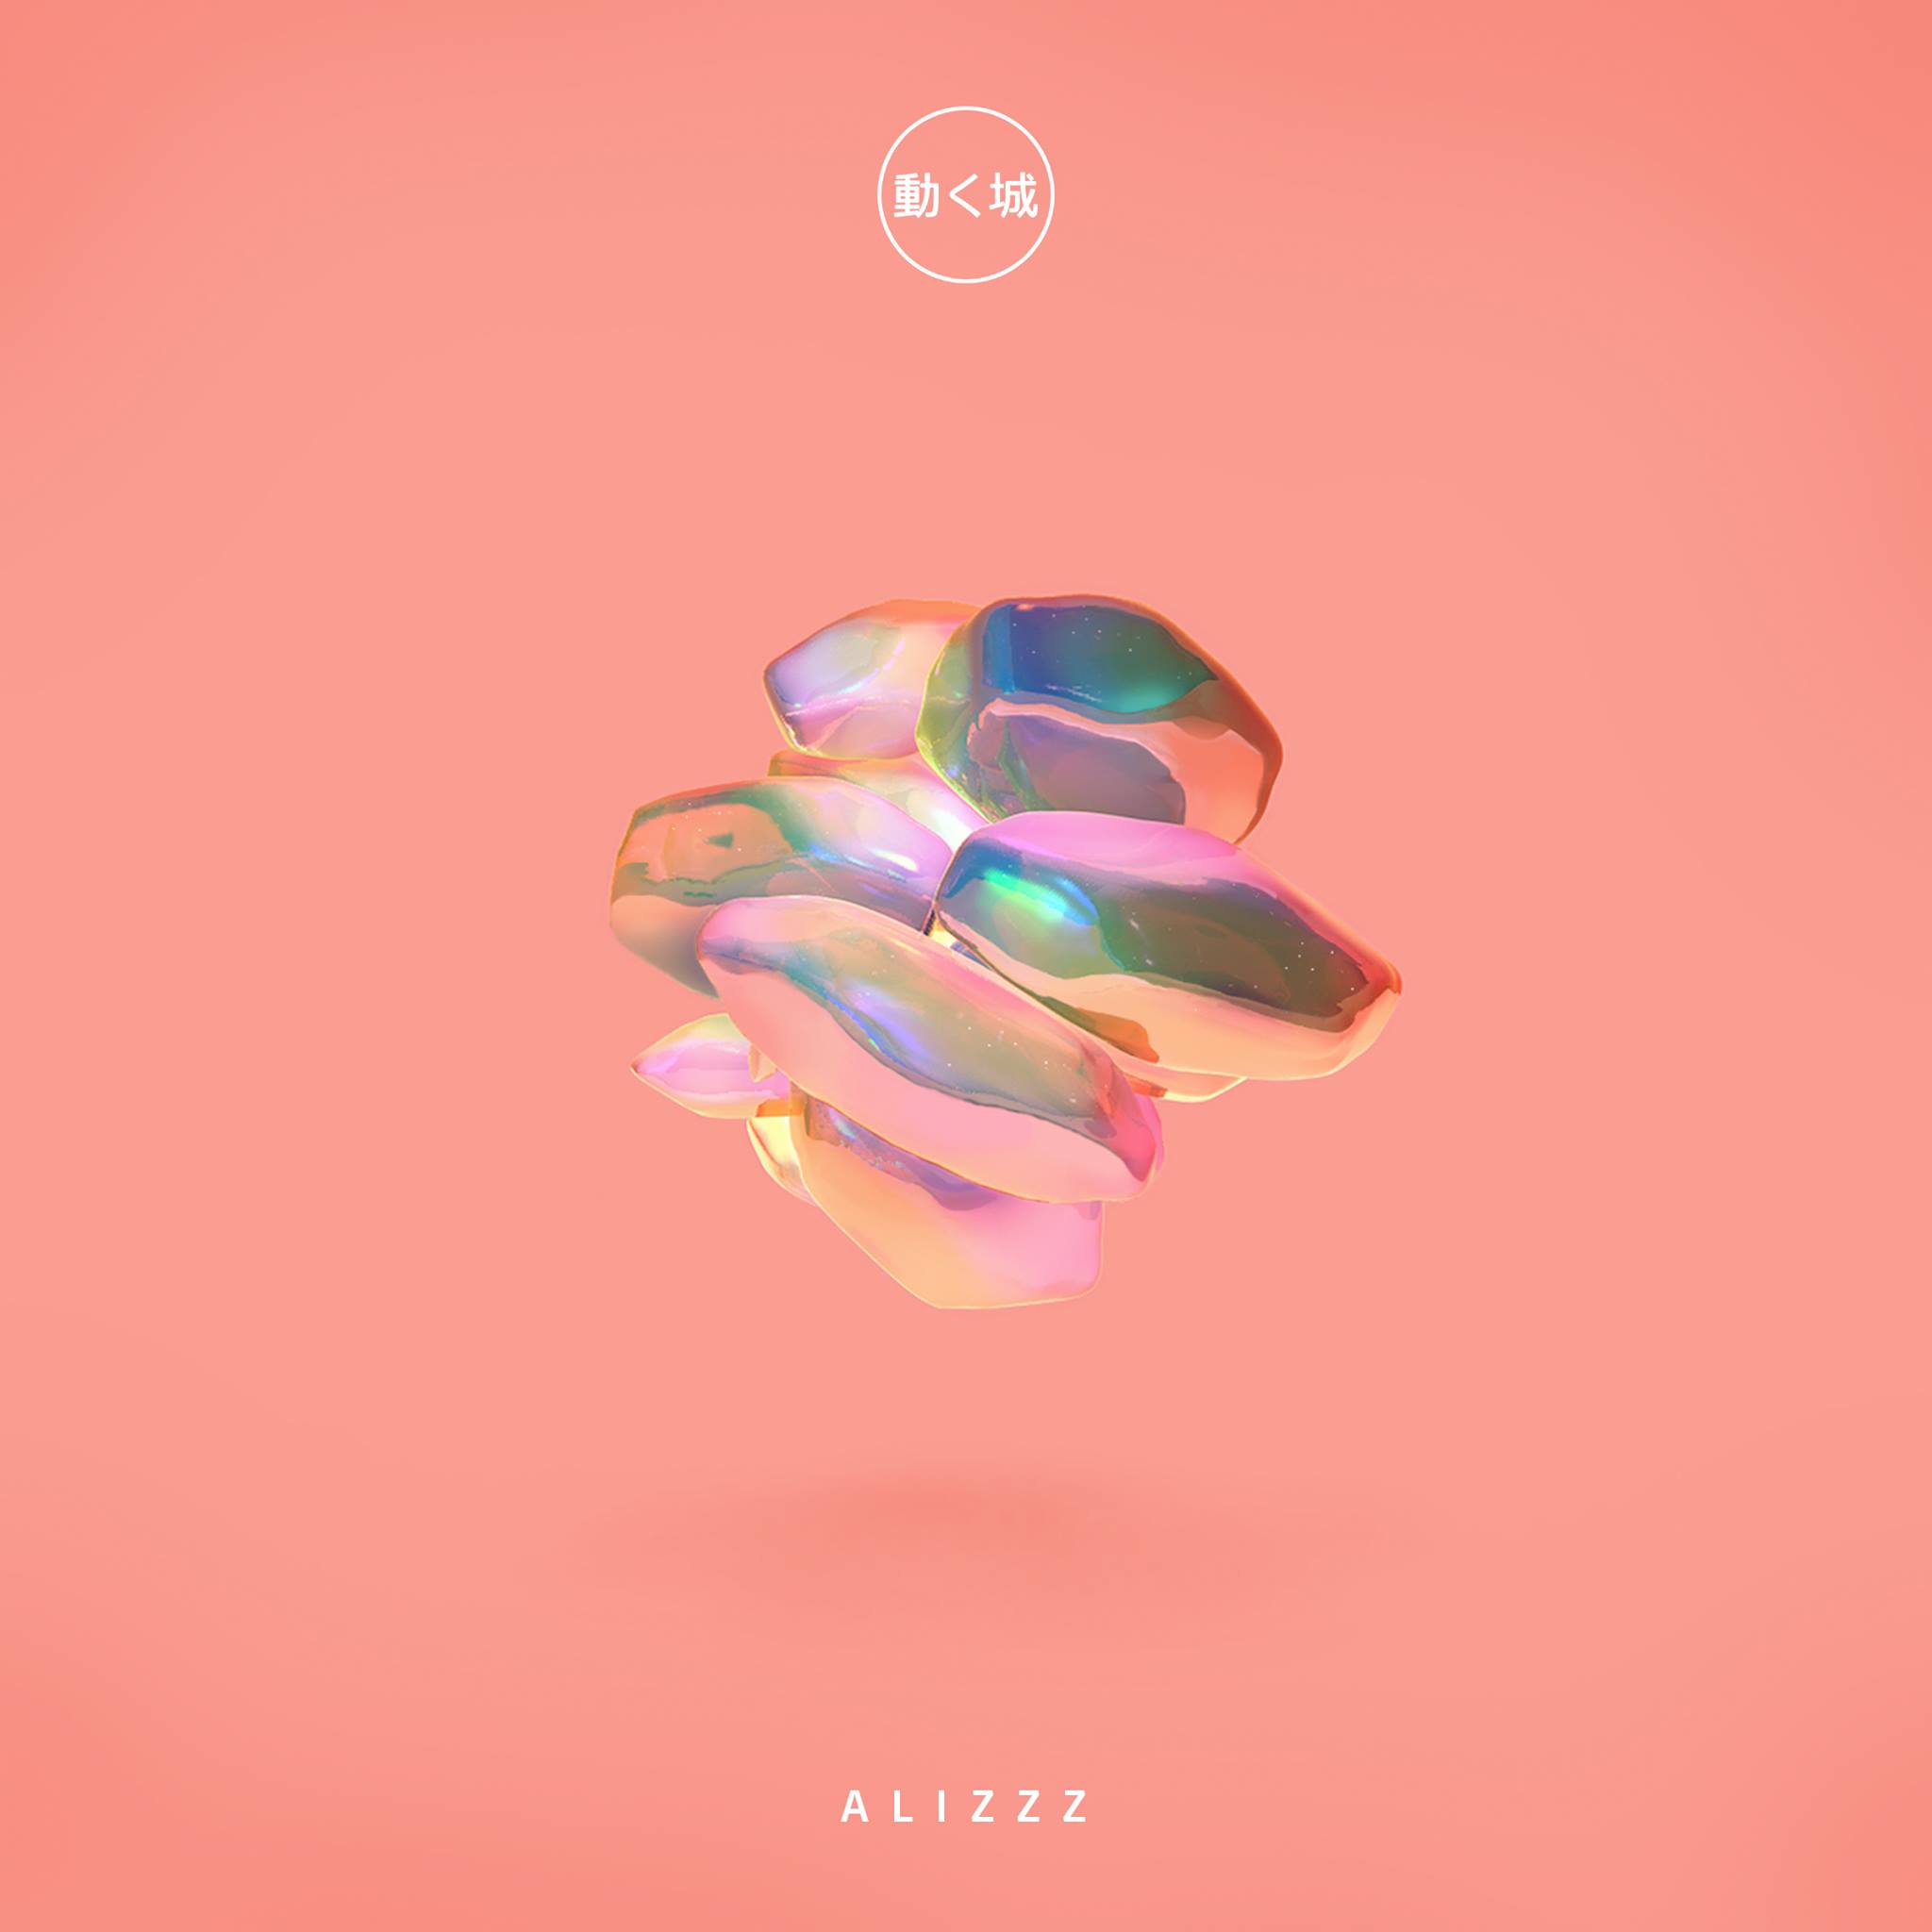 Moving Castle and Alizzz Team up to Bring us ‘Your Love’